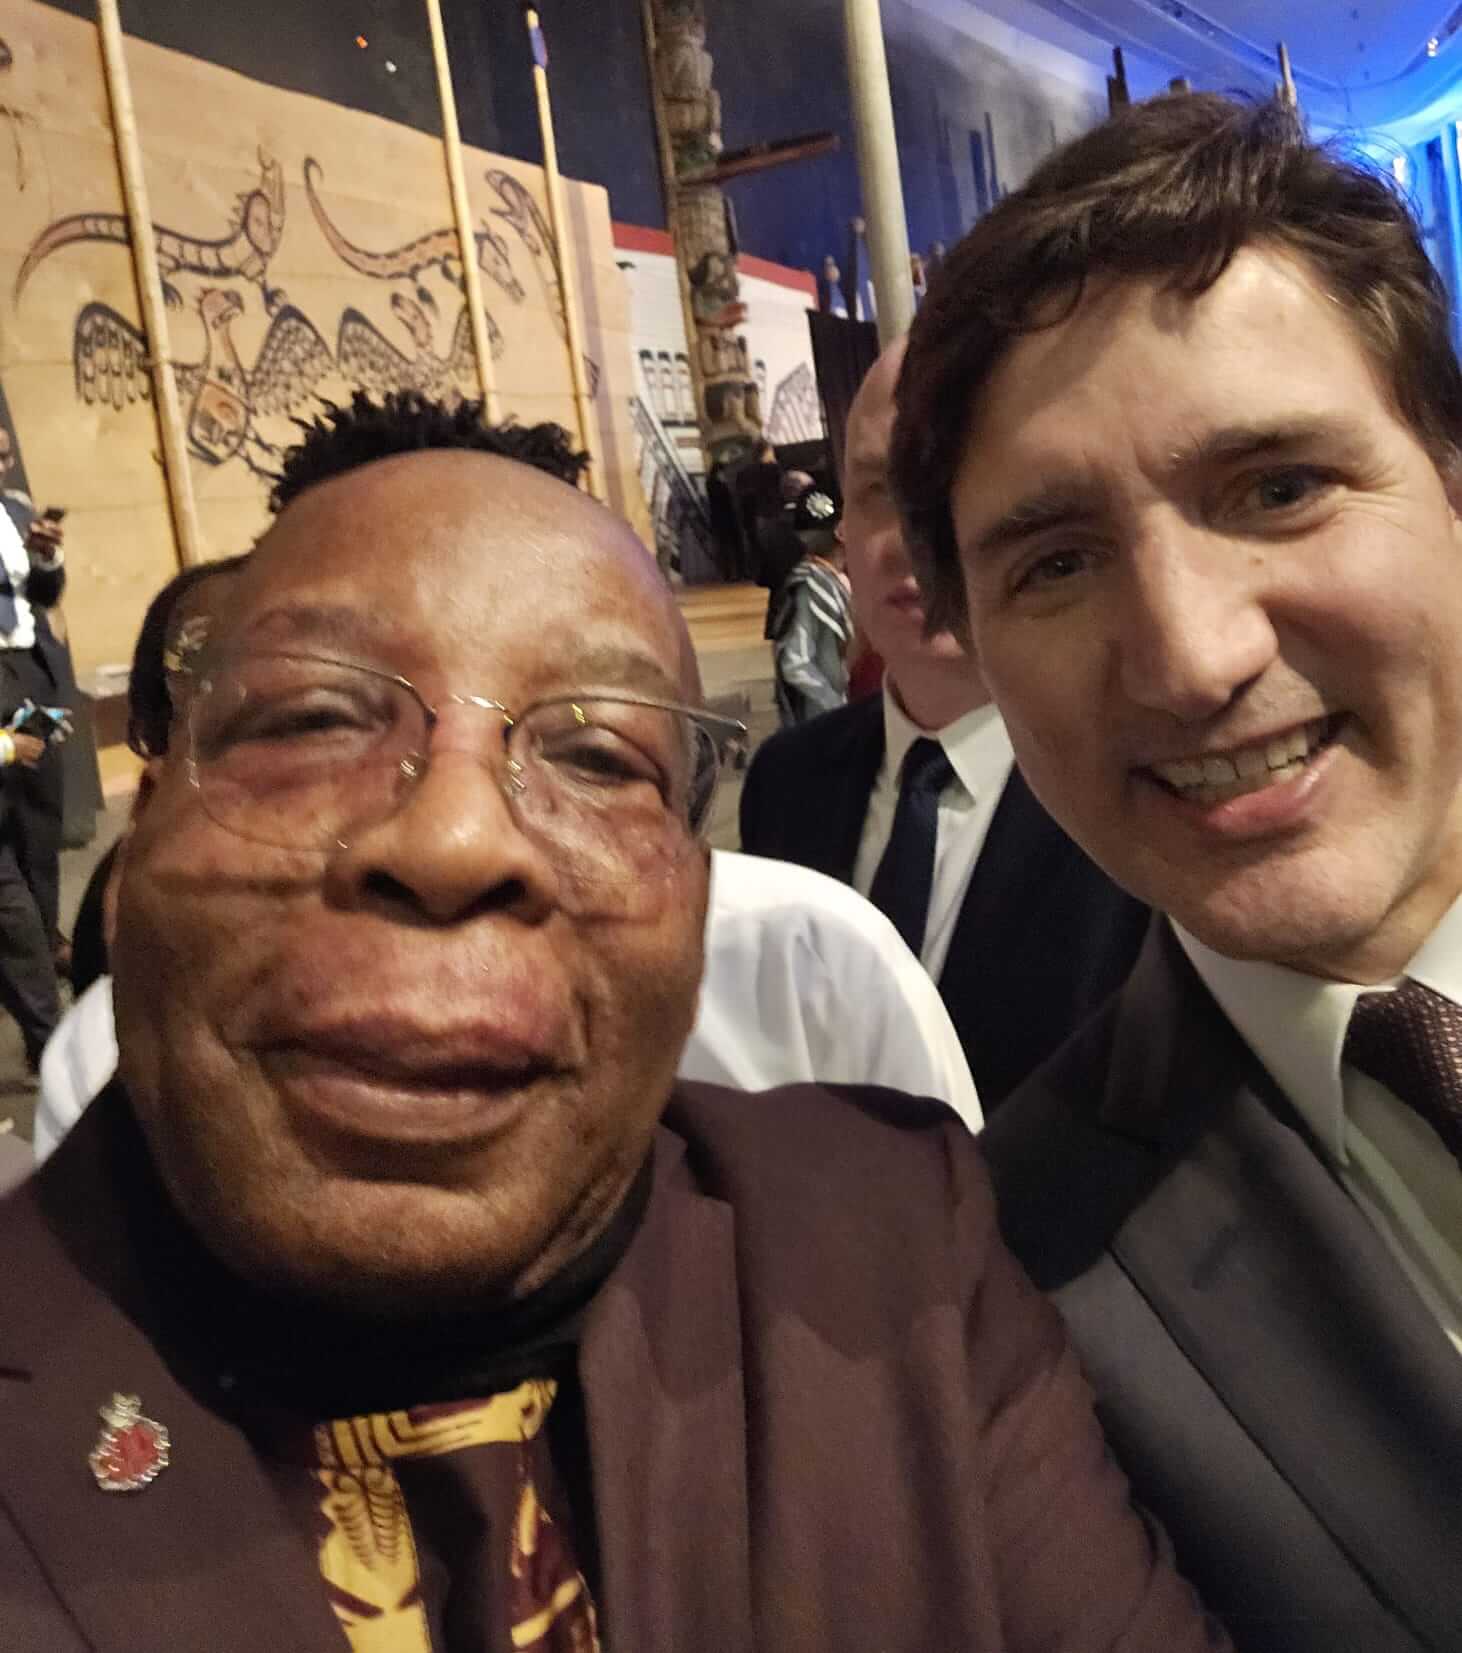 Dr. Leroy Clarke and Prime Minister Justin Trudeau